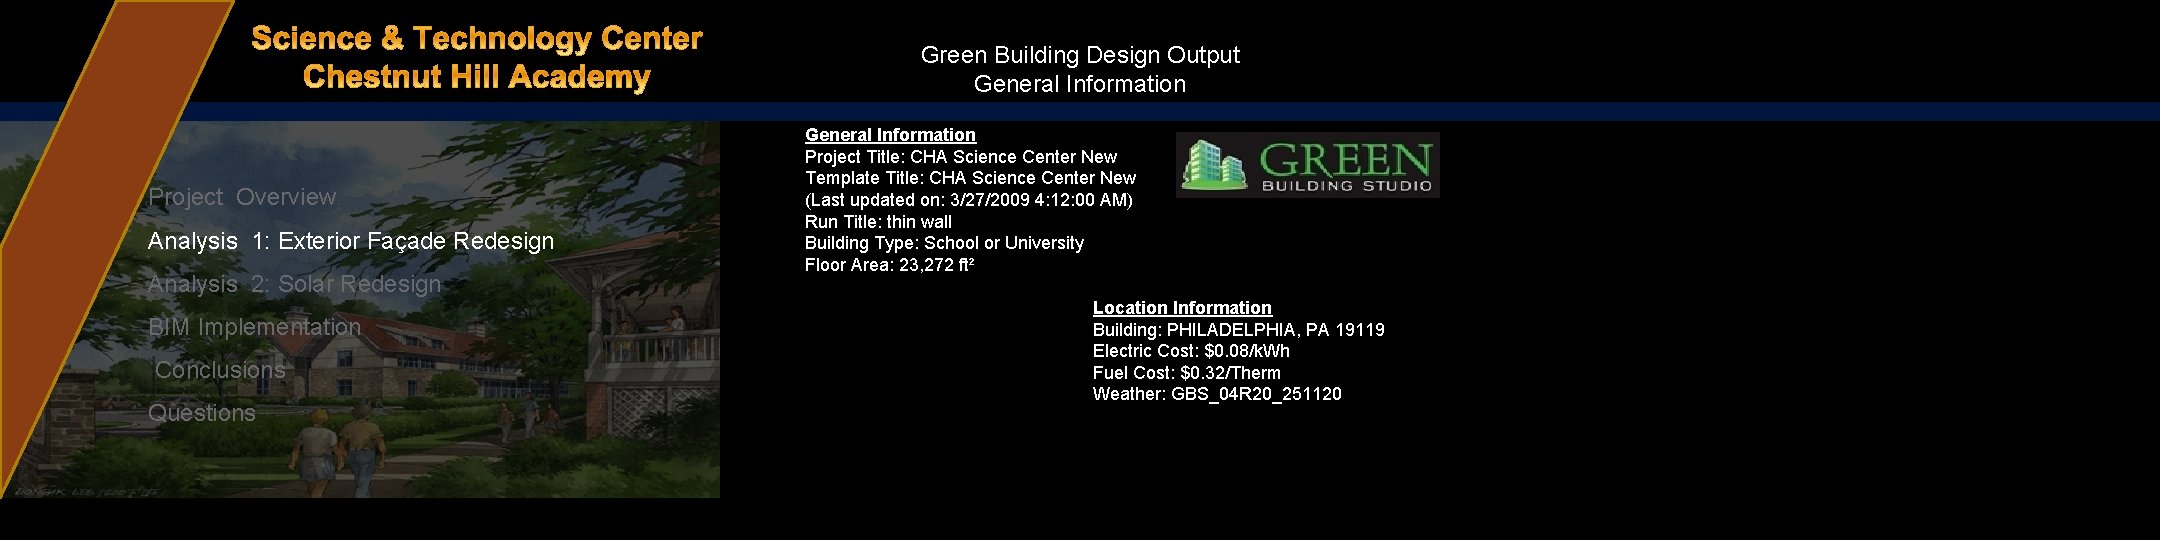 Green Building Design Output General Information Project Overview Analysis 1: Exterior Façade Redesign Analysis